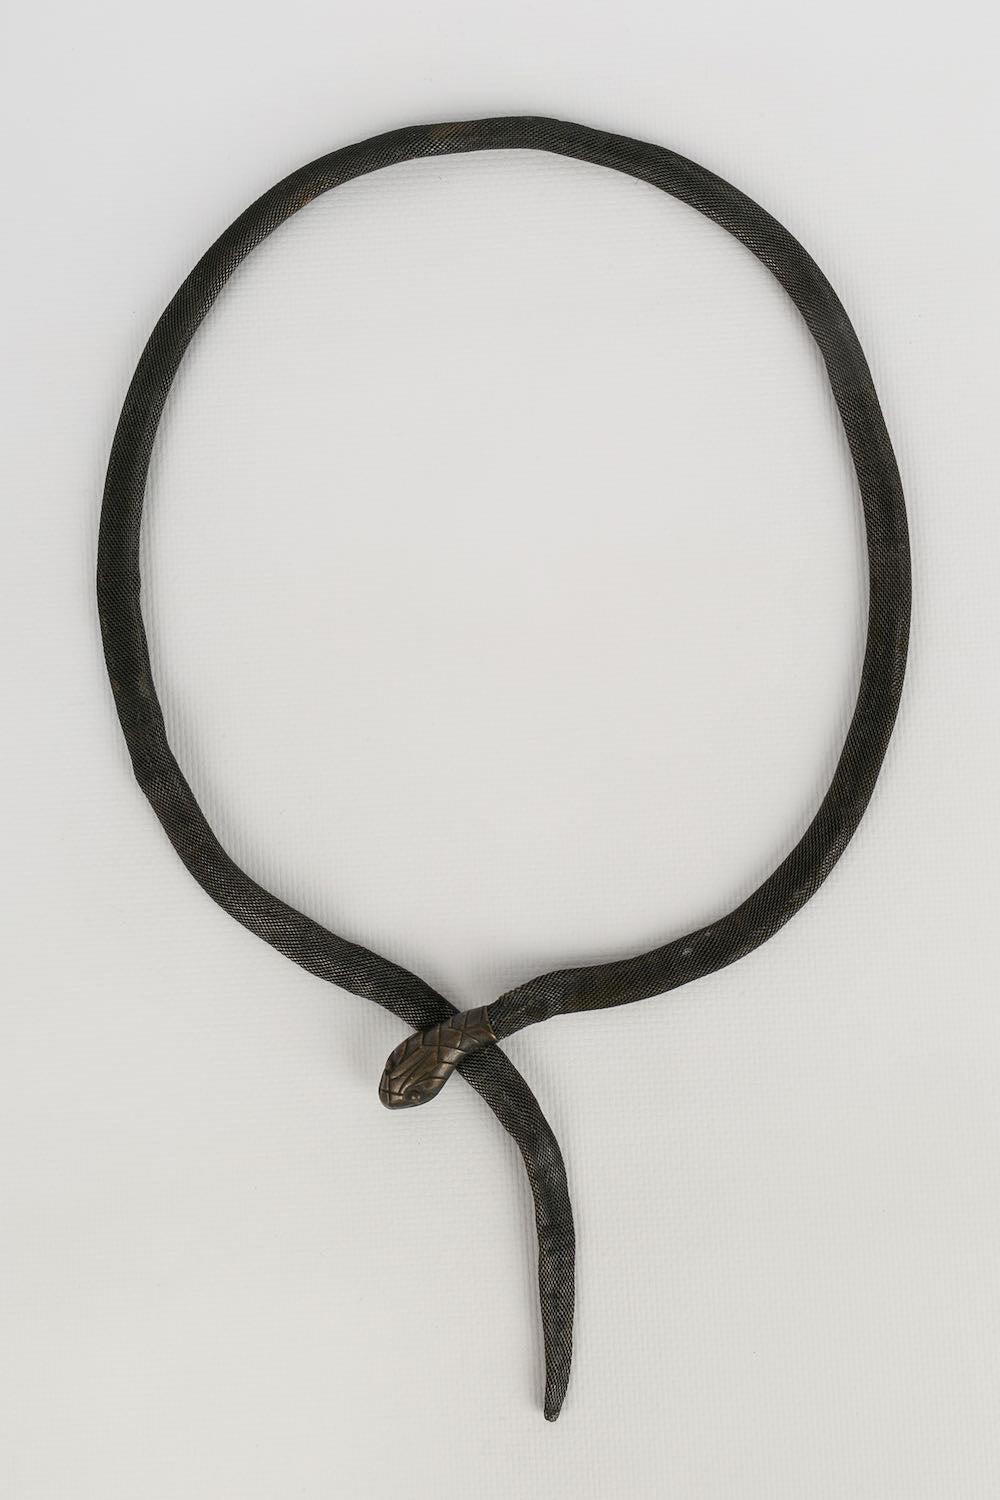 Dark silver metal belt representing a snake.

Additional information:
Condition: Good condition
Dimensions: Length : 83 cm
Period: 20th Century

Seller Reference: ACC77